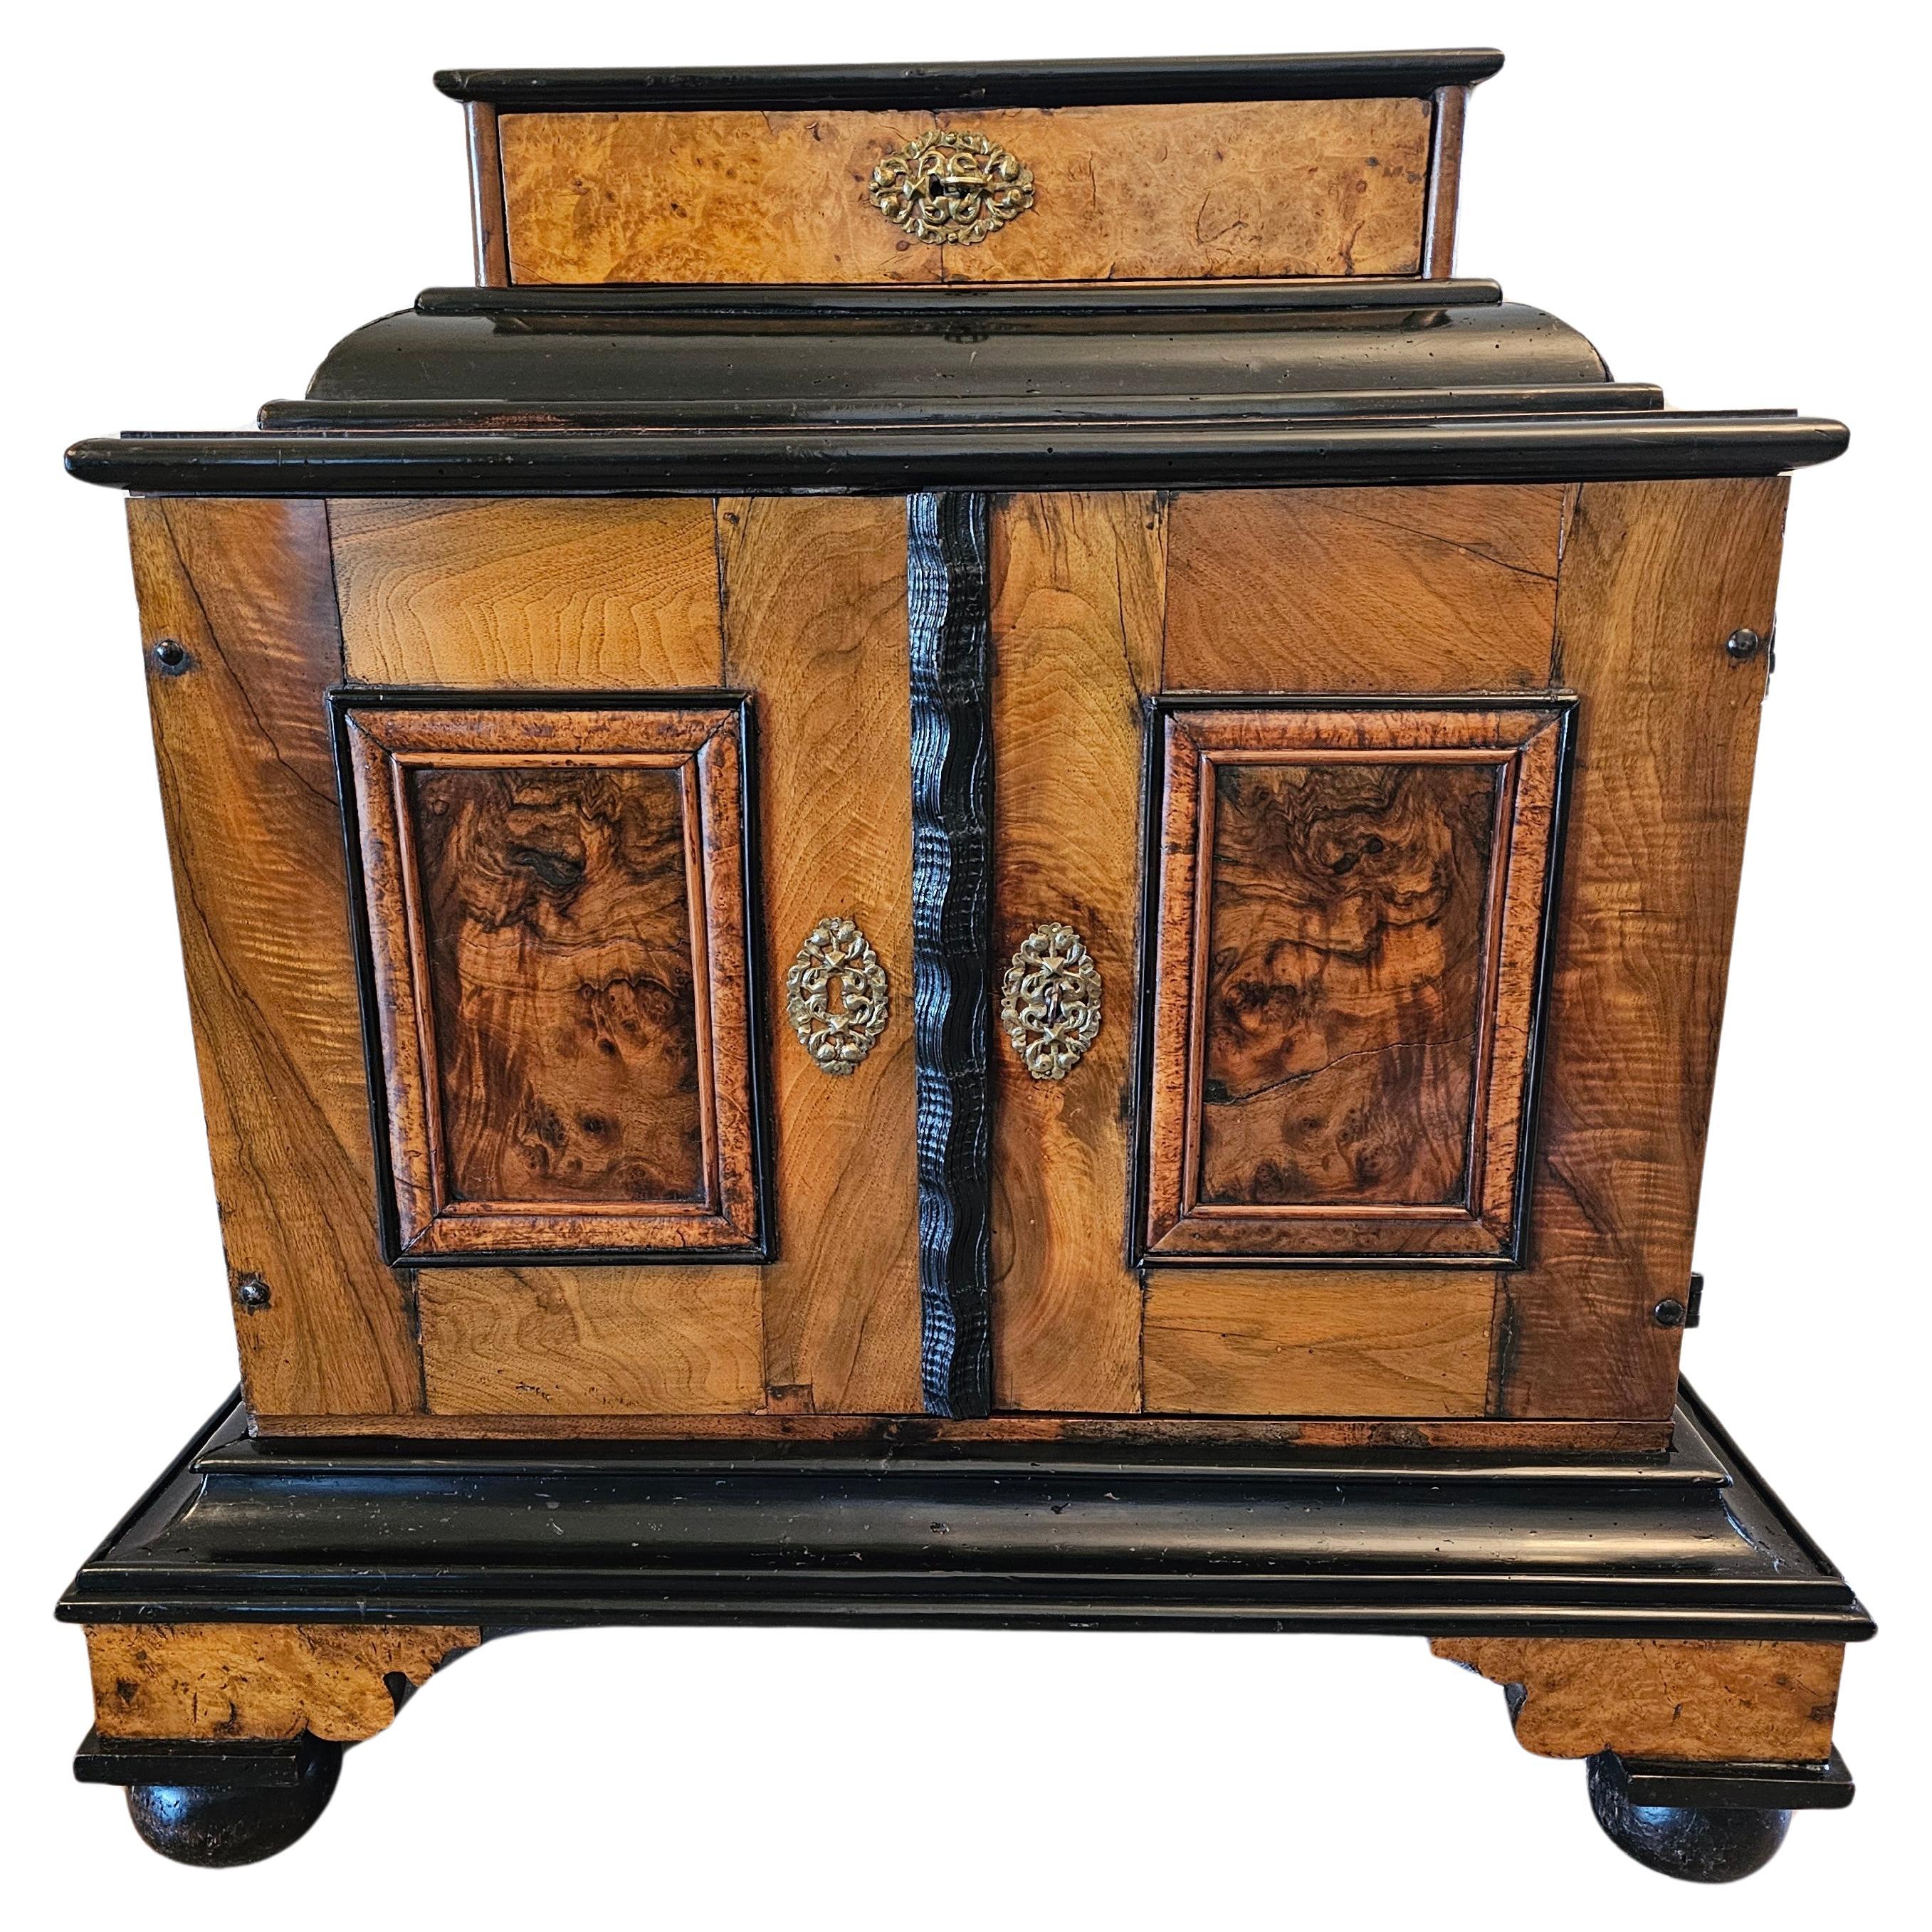 A fine Biedermeier Period (1815-1848) walnut maple burlwood marquetry table cabinet - wunderkammer (cabinet of curiosities) with fifteen drawers and concealed secret compartments, circa 1820. 

This architectural curiosity cabinet is a testament to